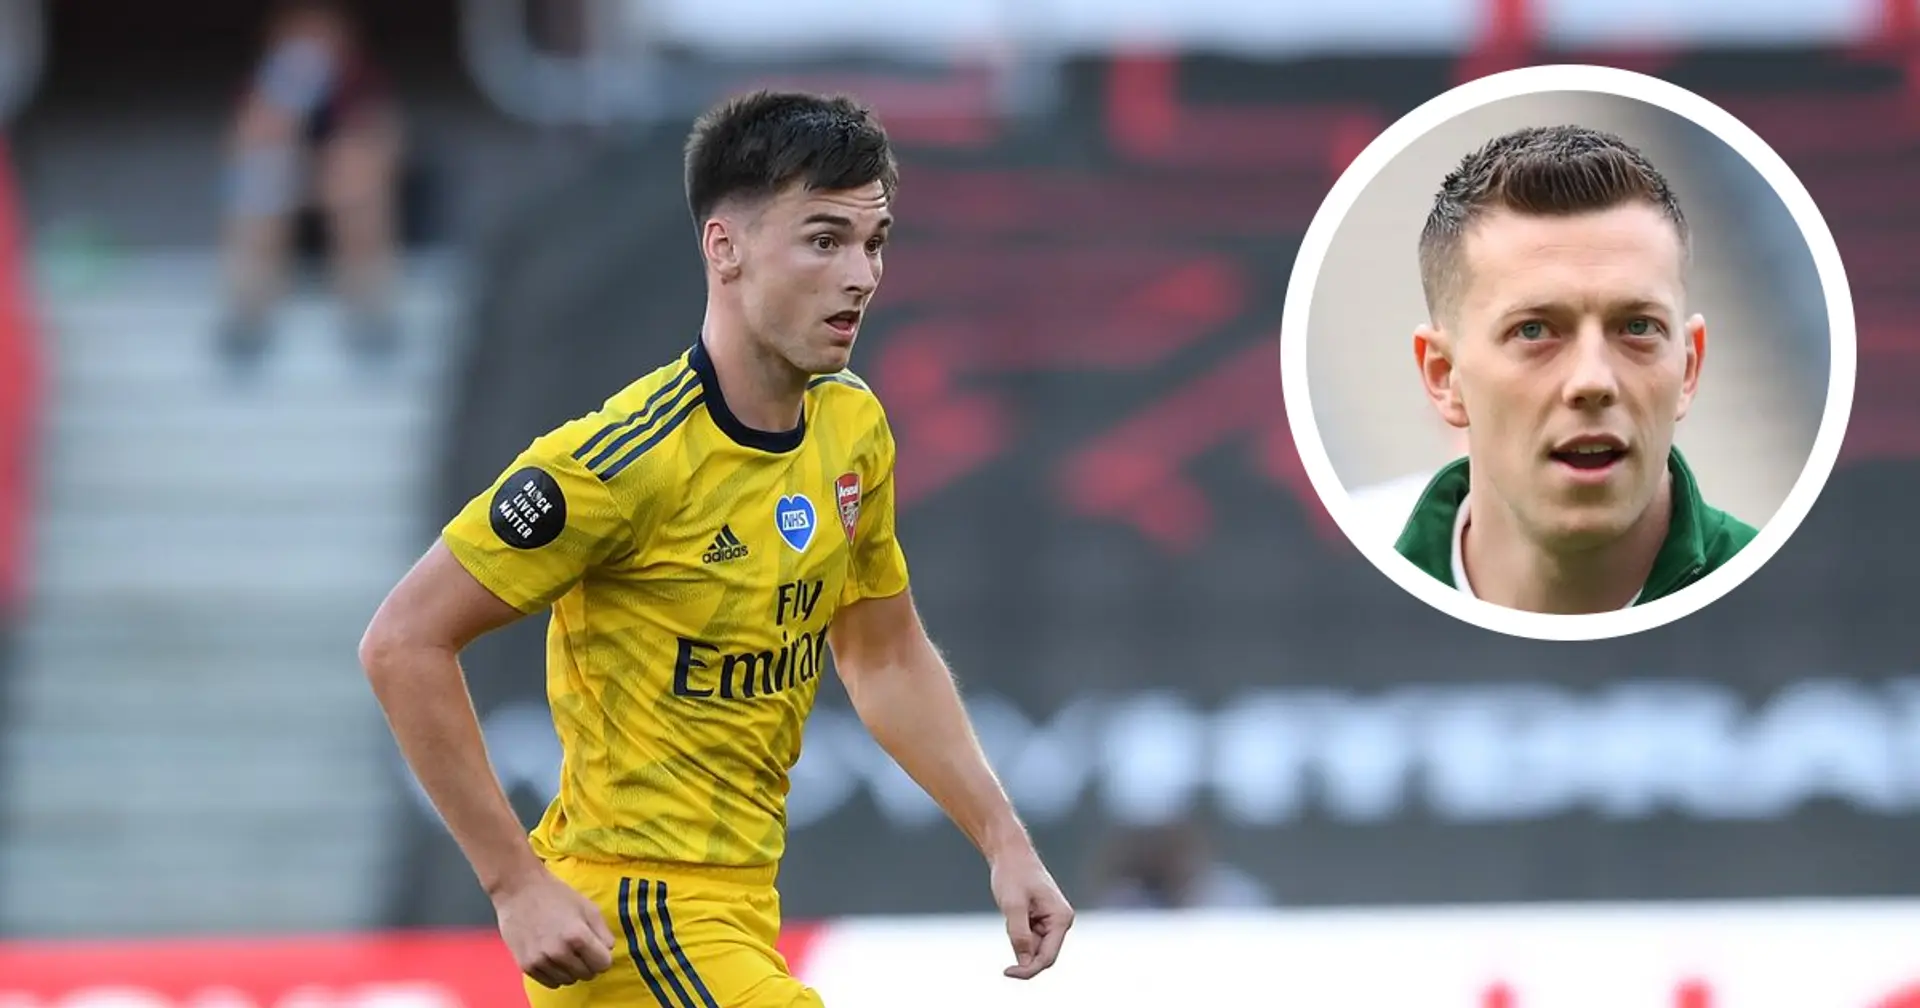 'He's gone from strength to strength': Former teammate piles praise on Tierney